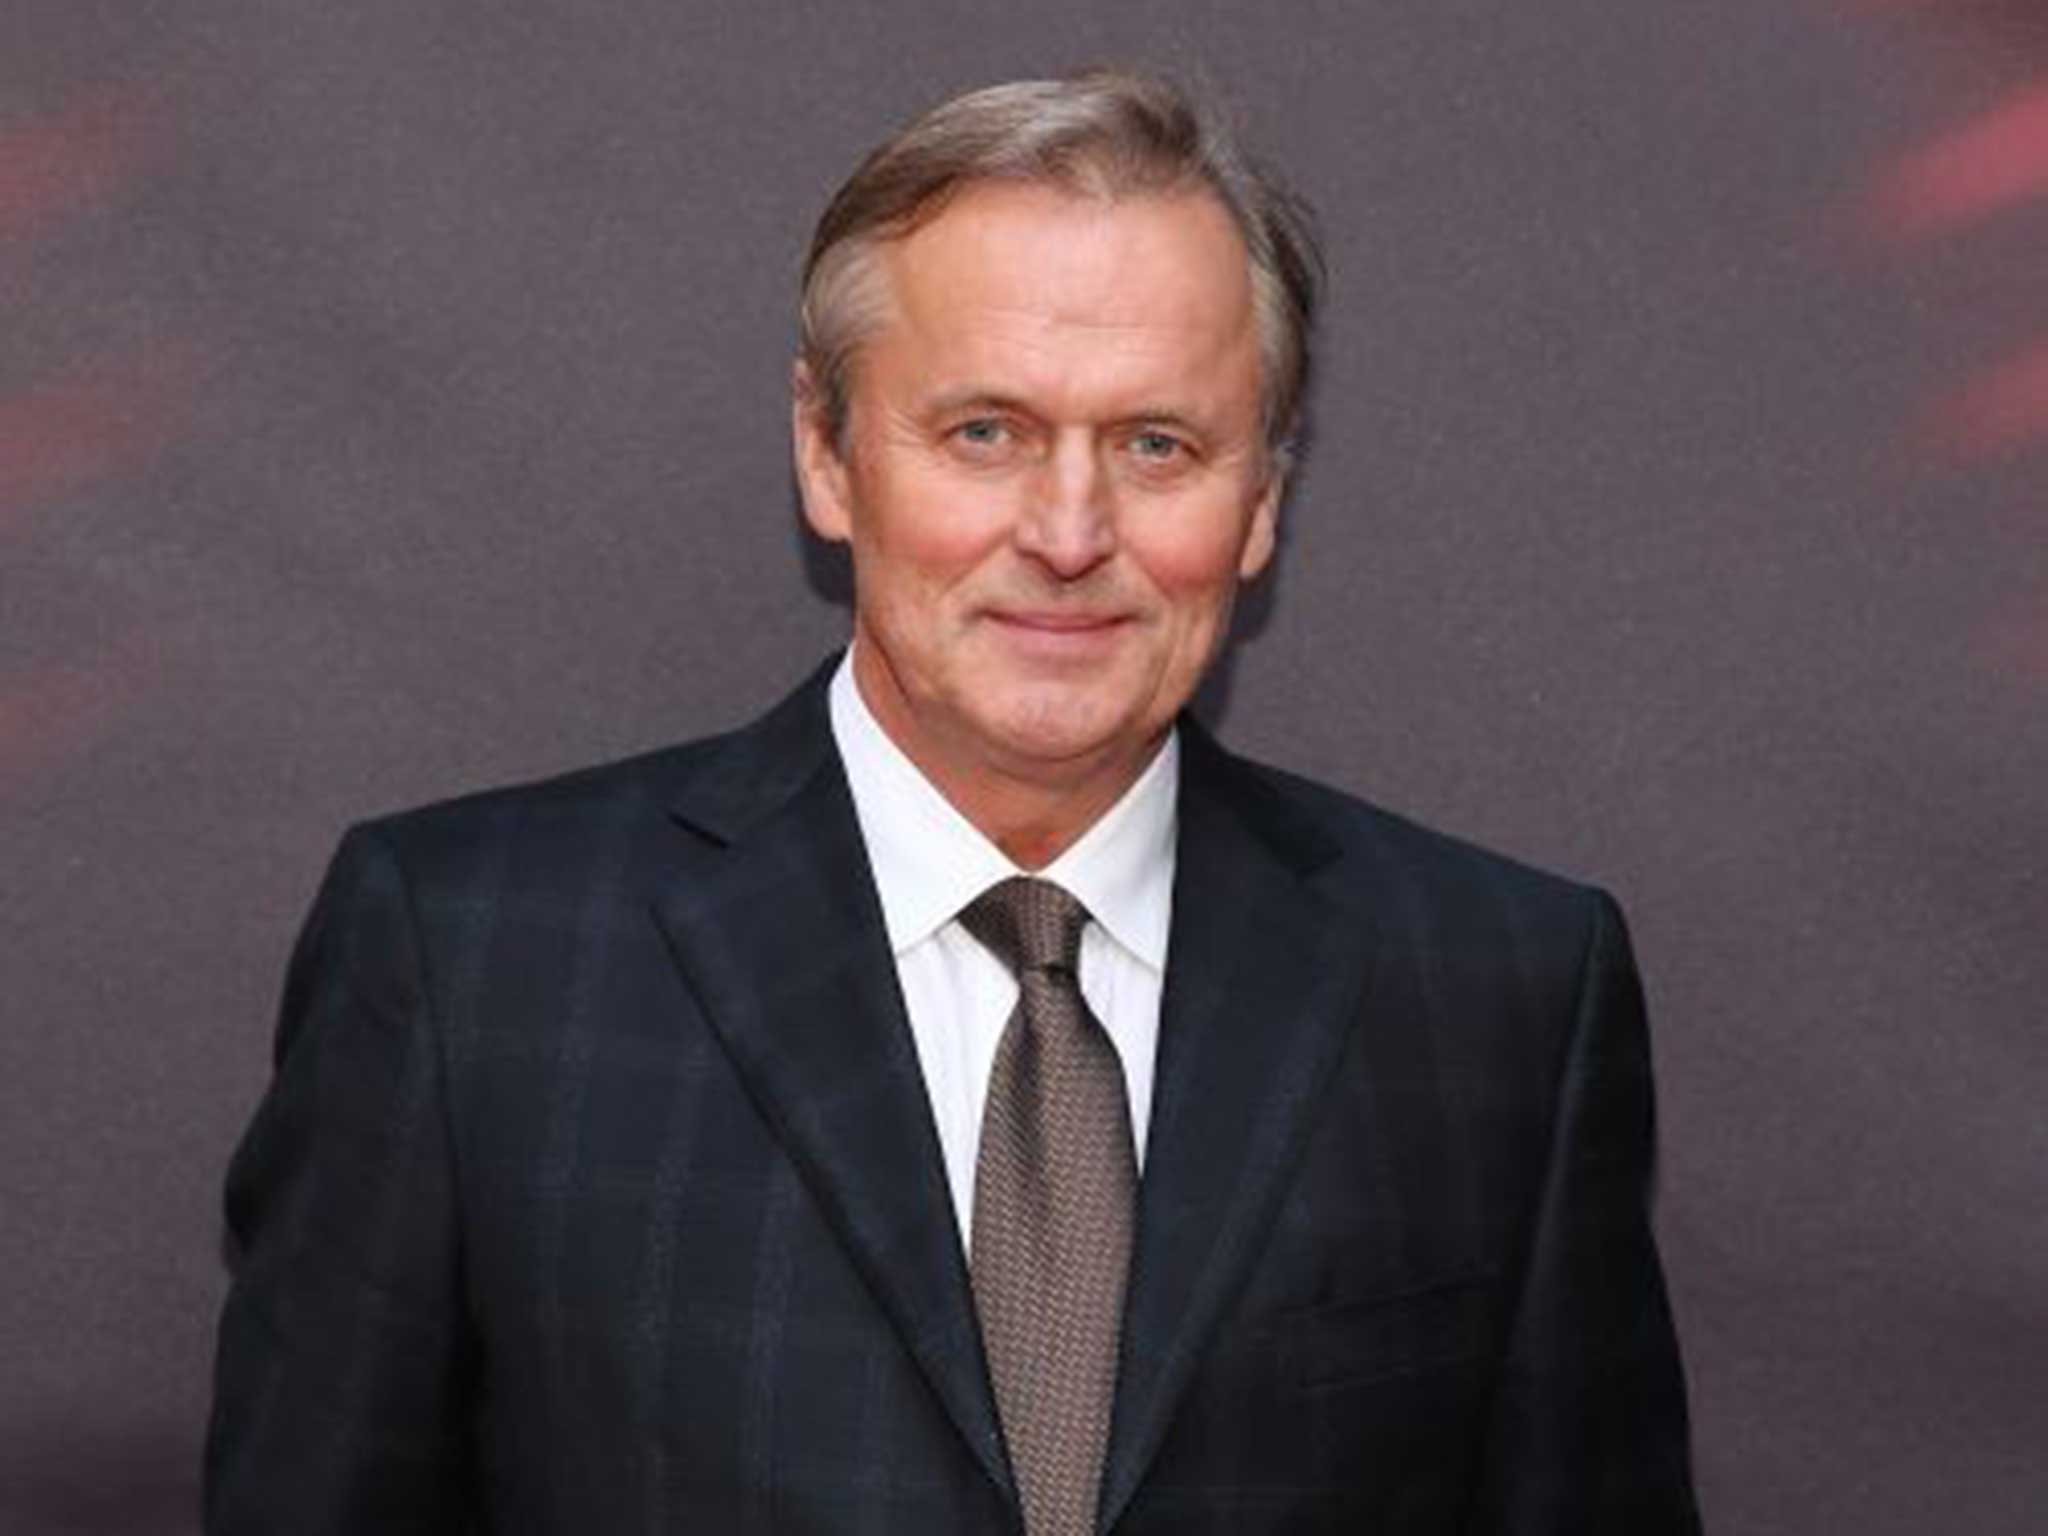 Grisham has waded into controversy with his latest remarks